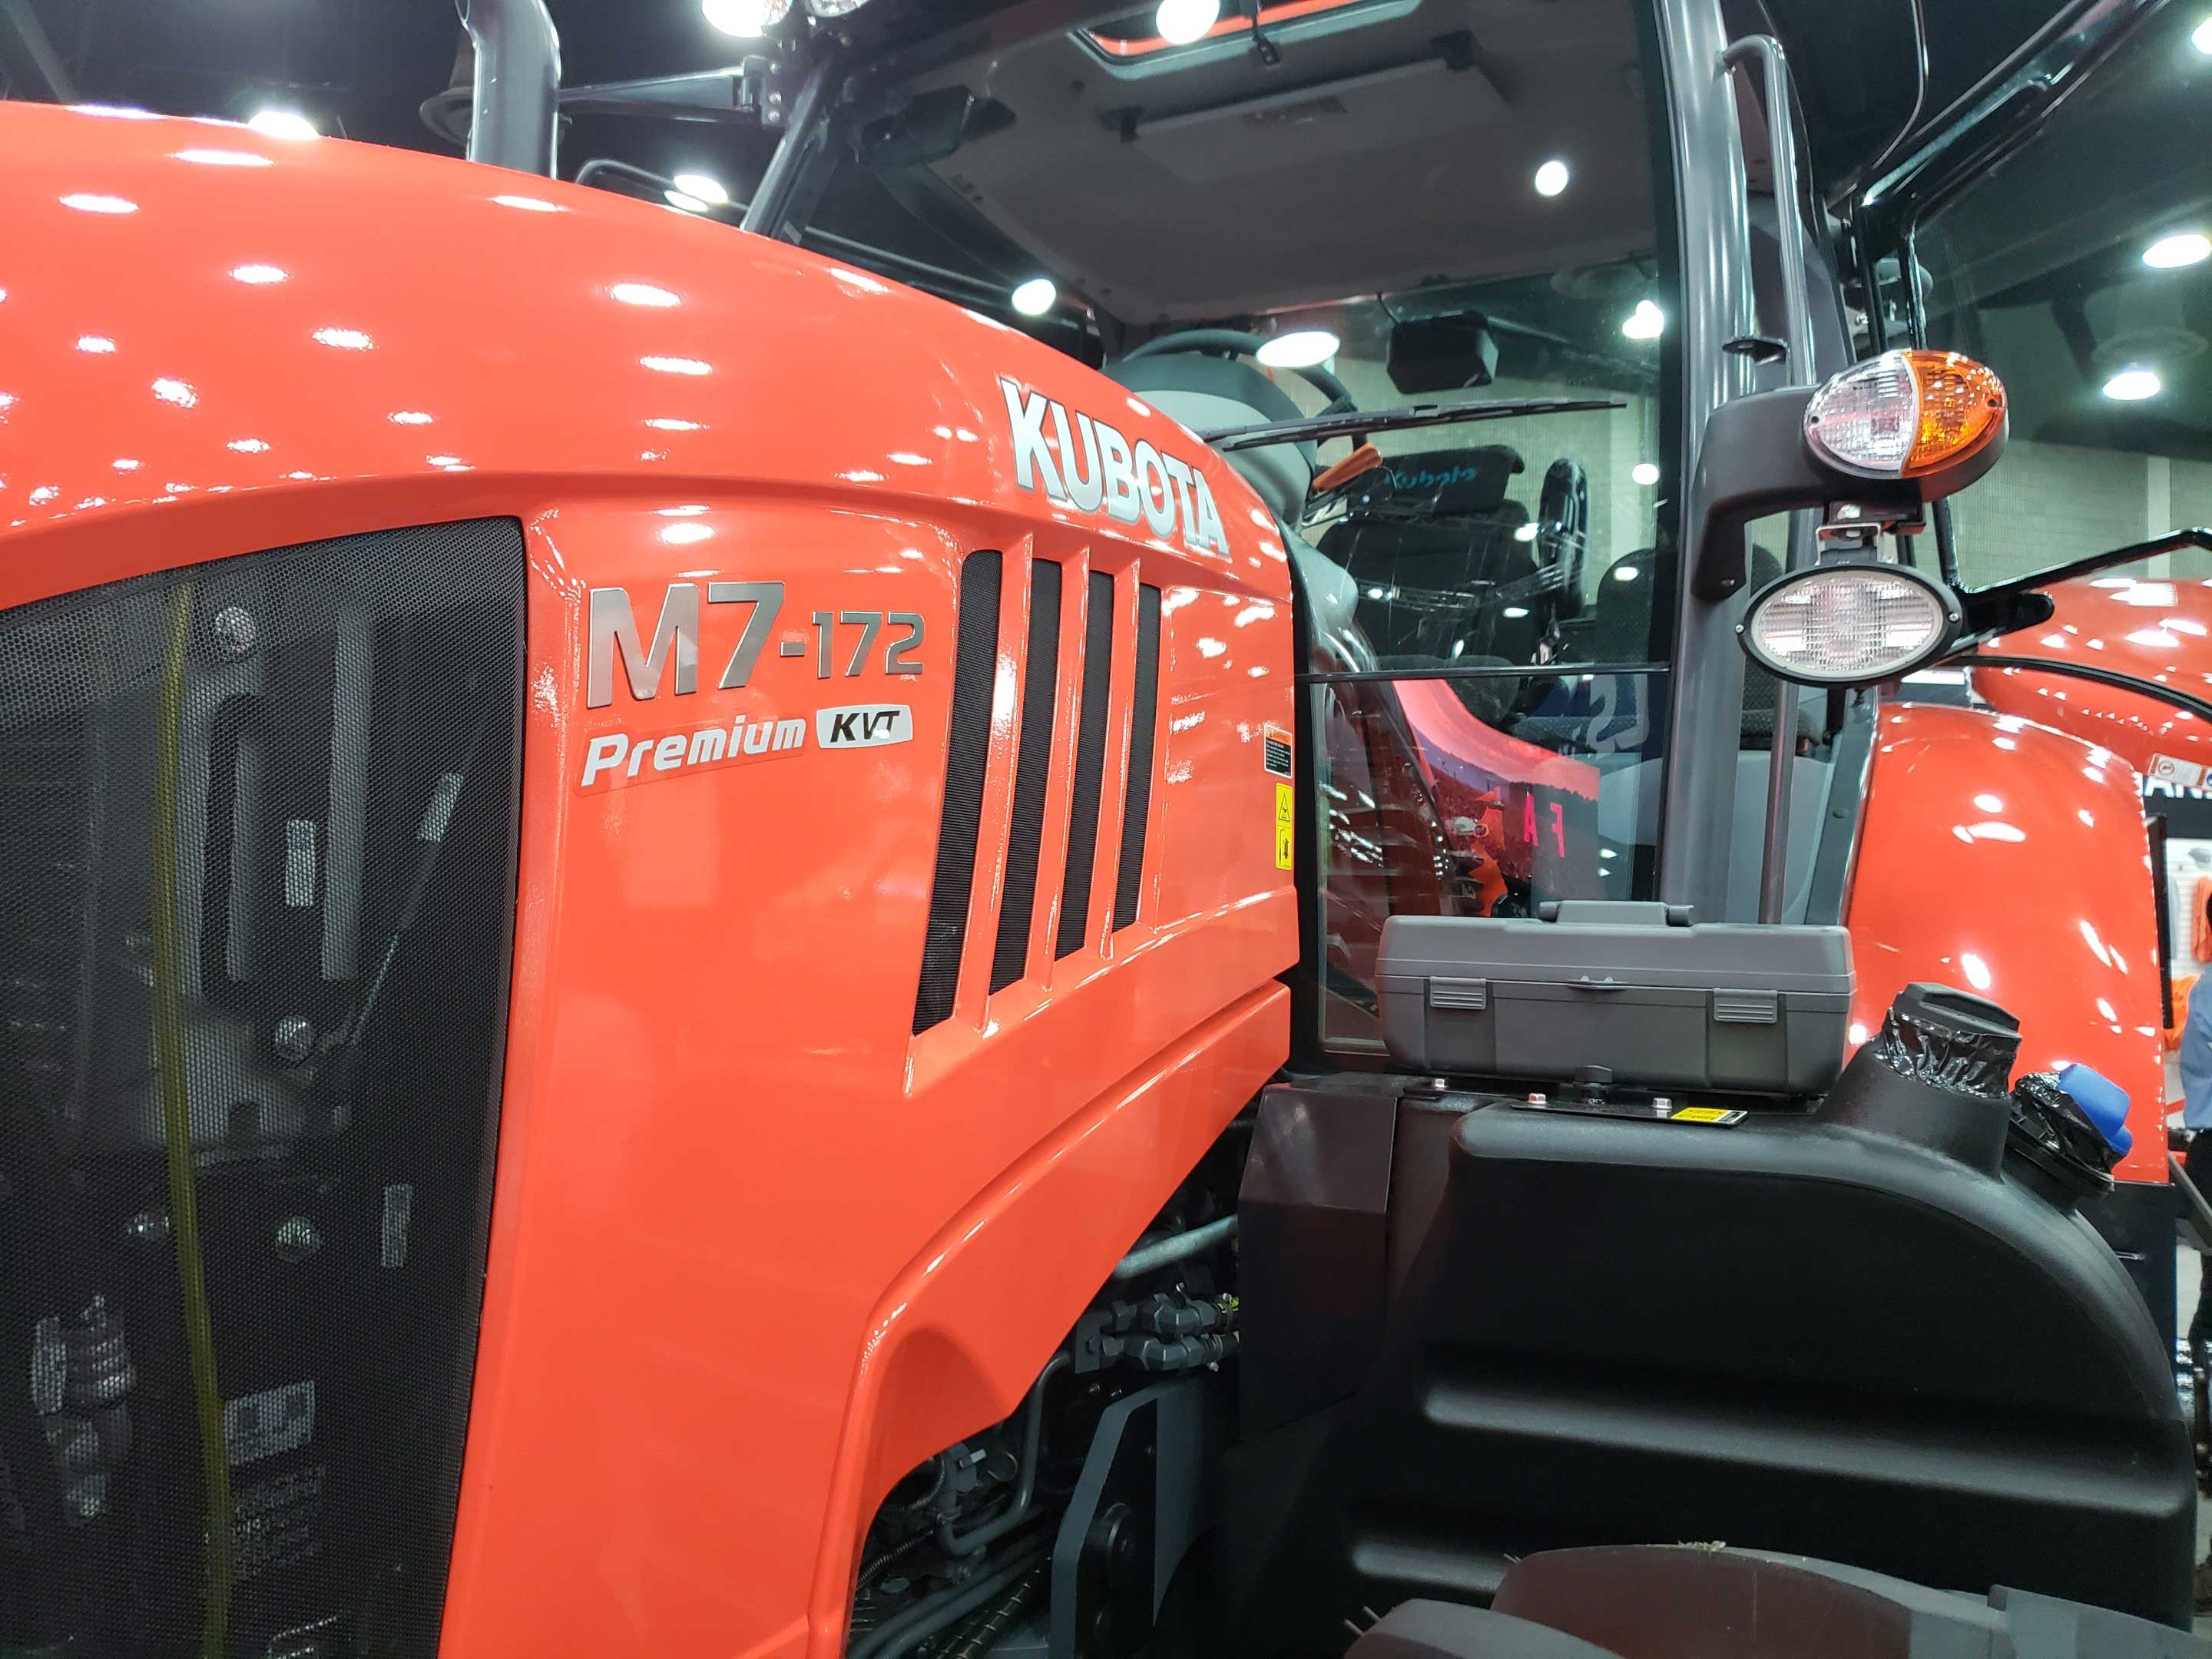 Kubota S 2nd Gen M7 Tractor Is Geared For Livestock Farmers Agdaily